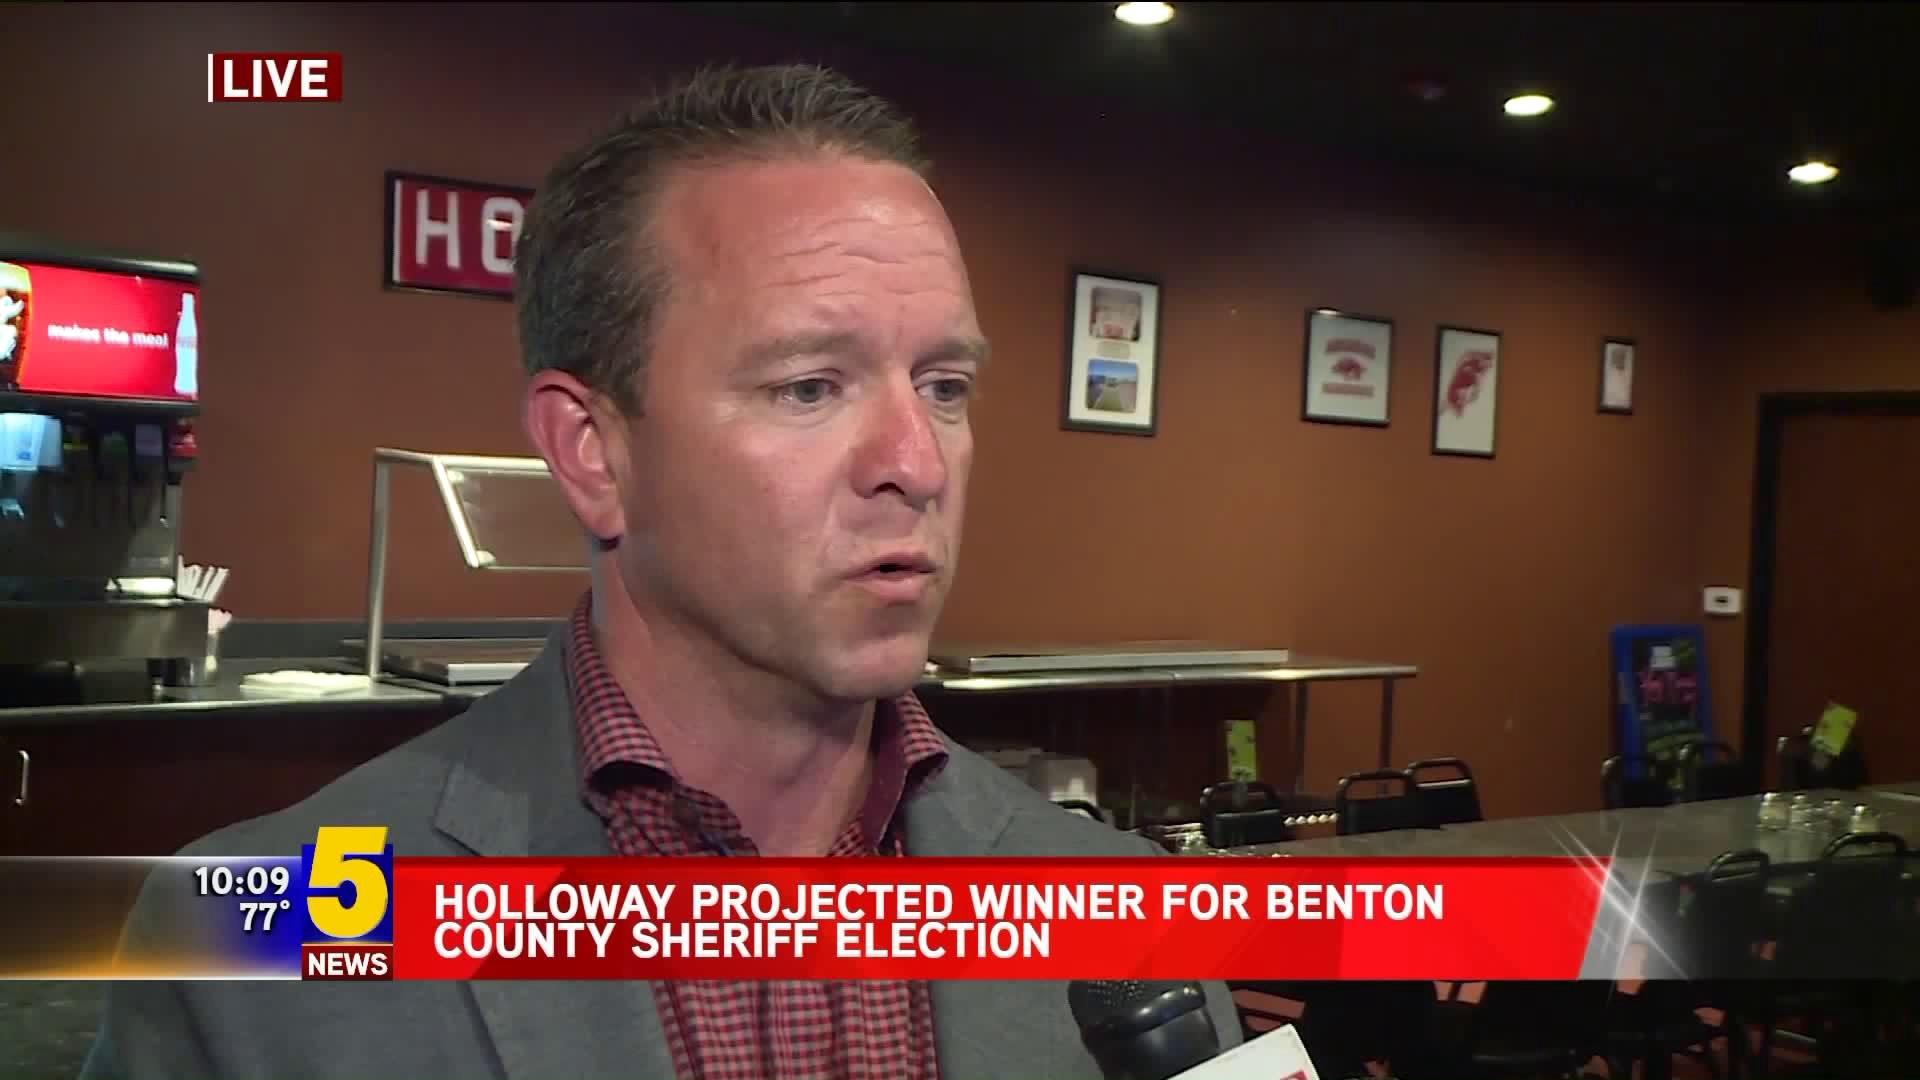 Holloway Projected Winner For Benton County Sheriff